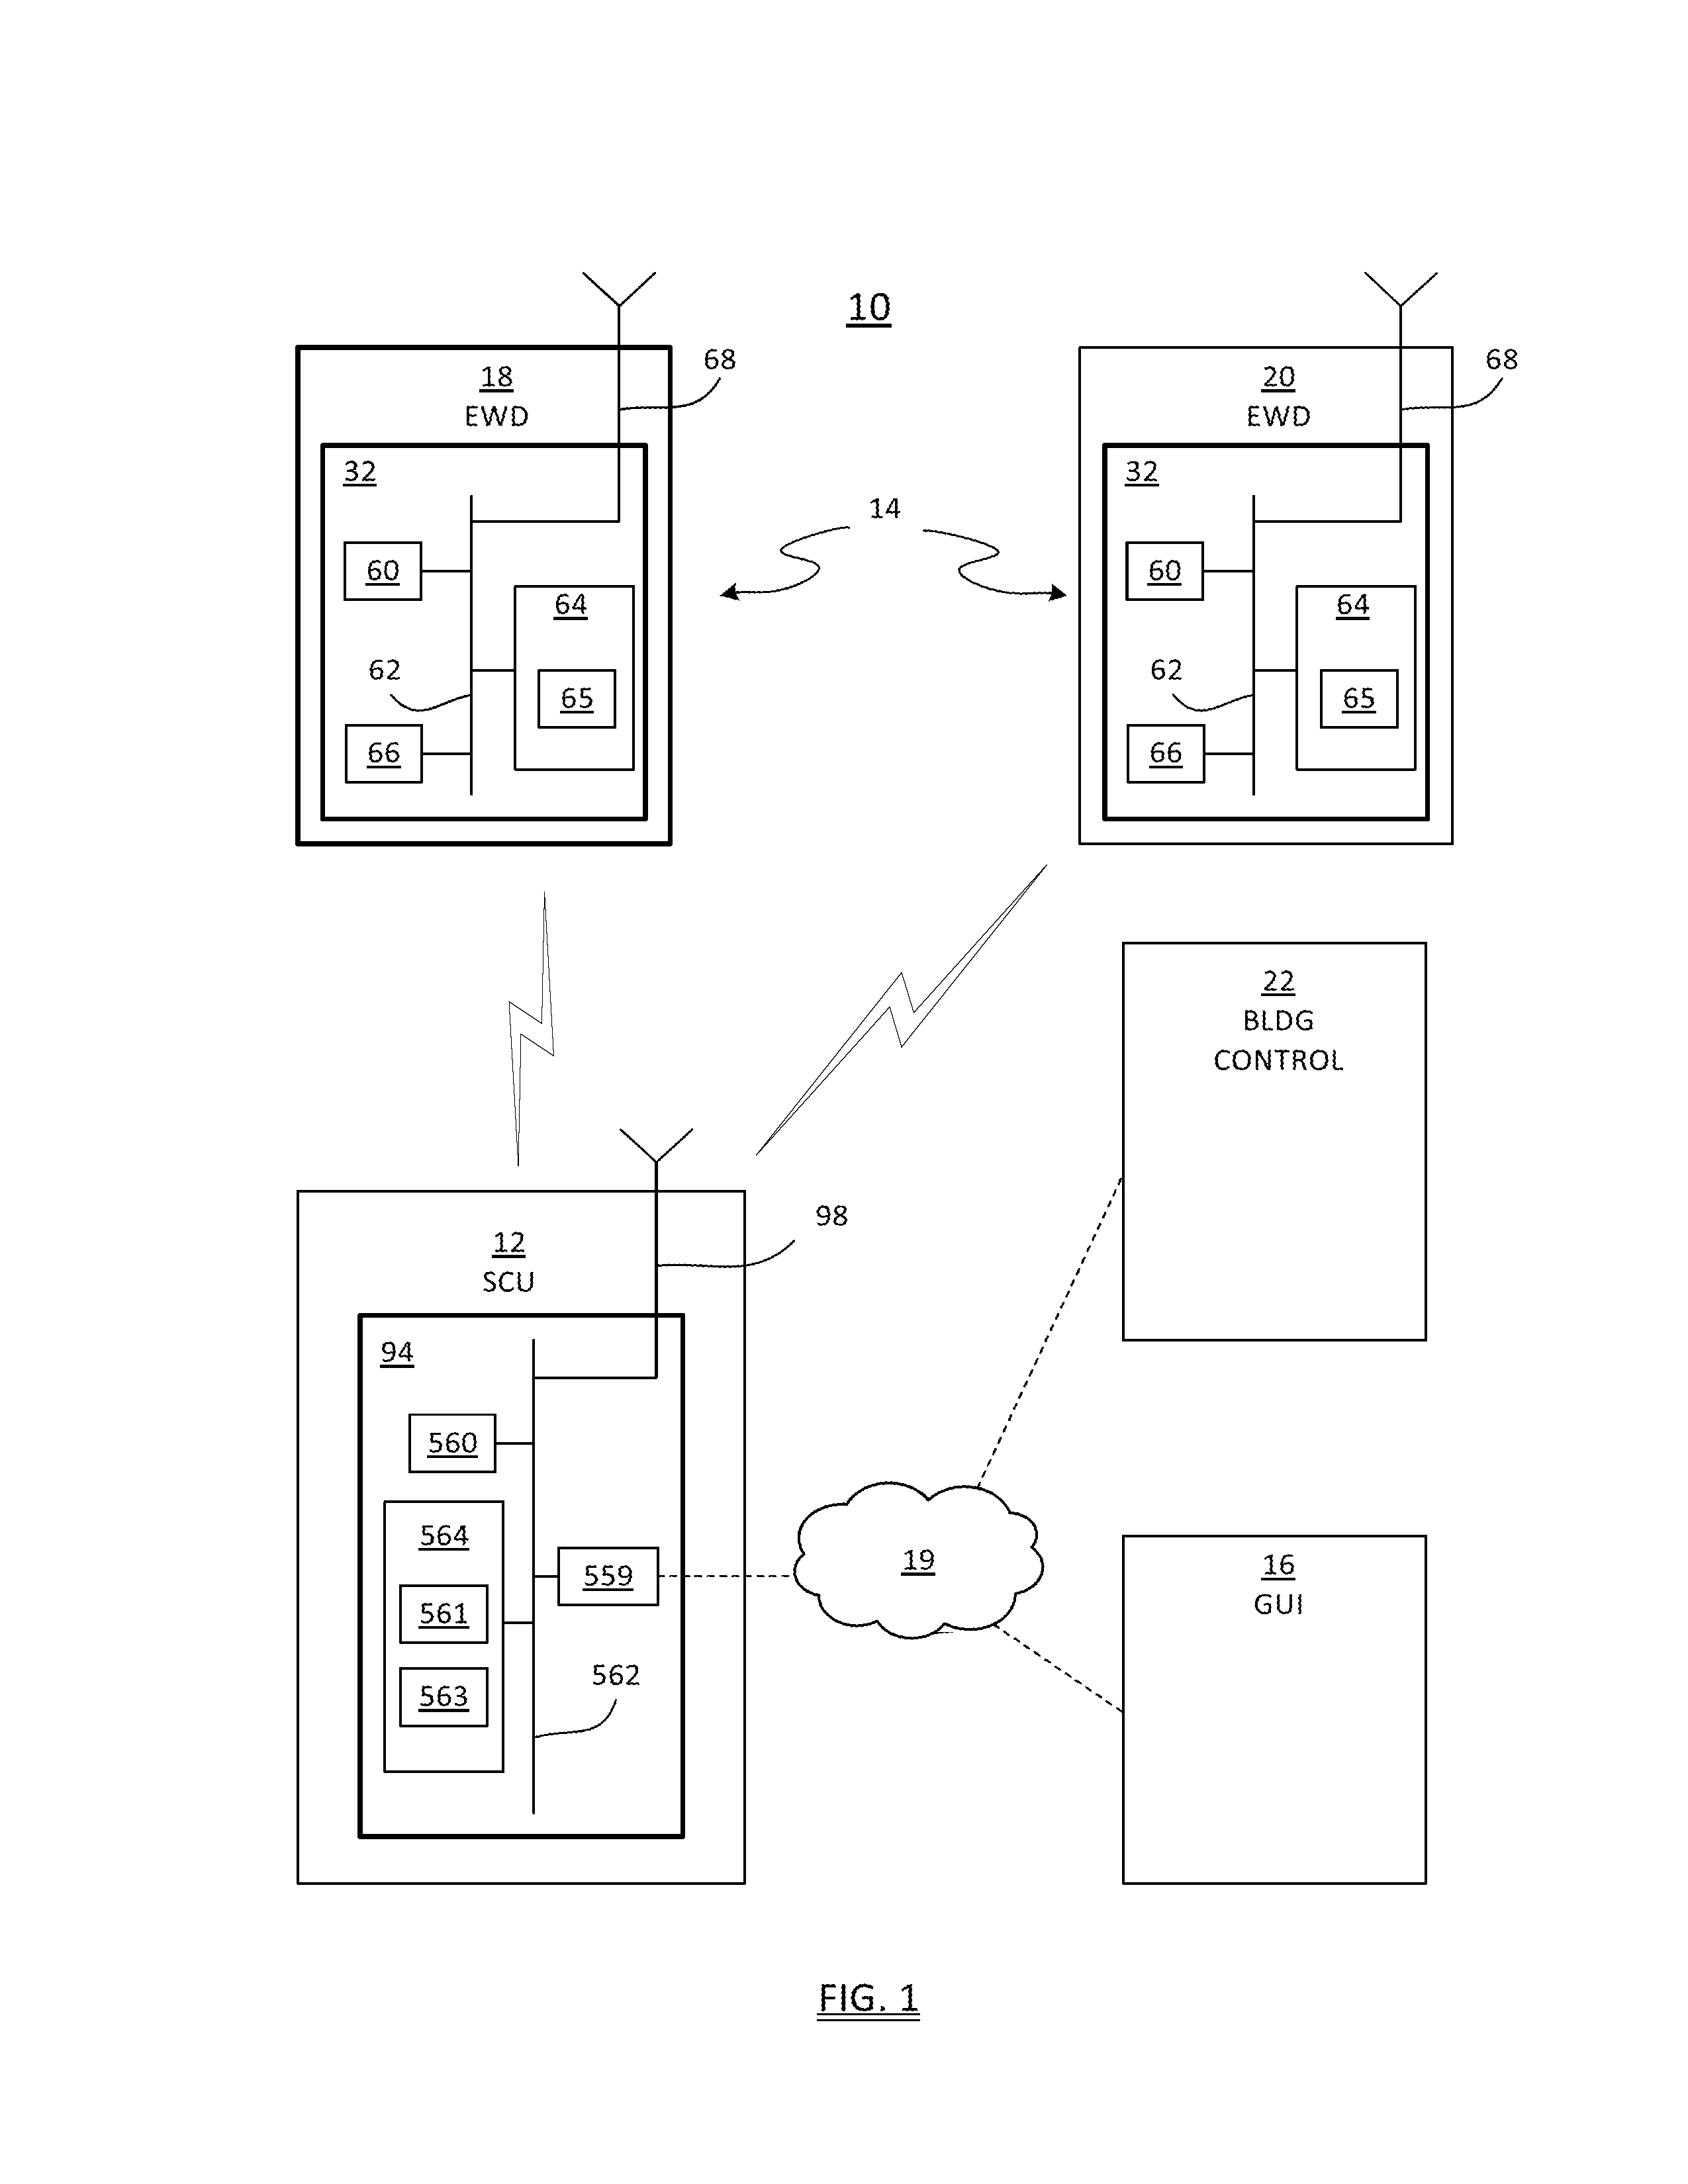 System for building management of electricity via network control of point-of-use devices